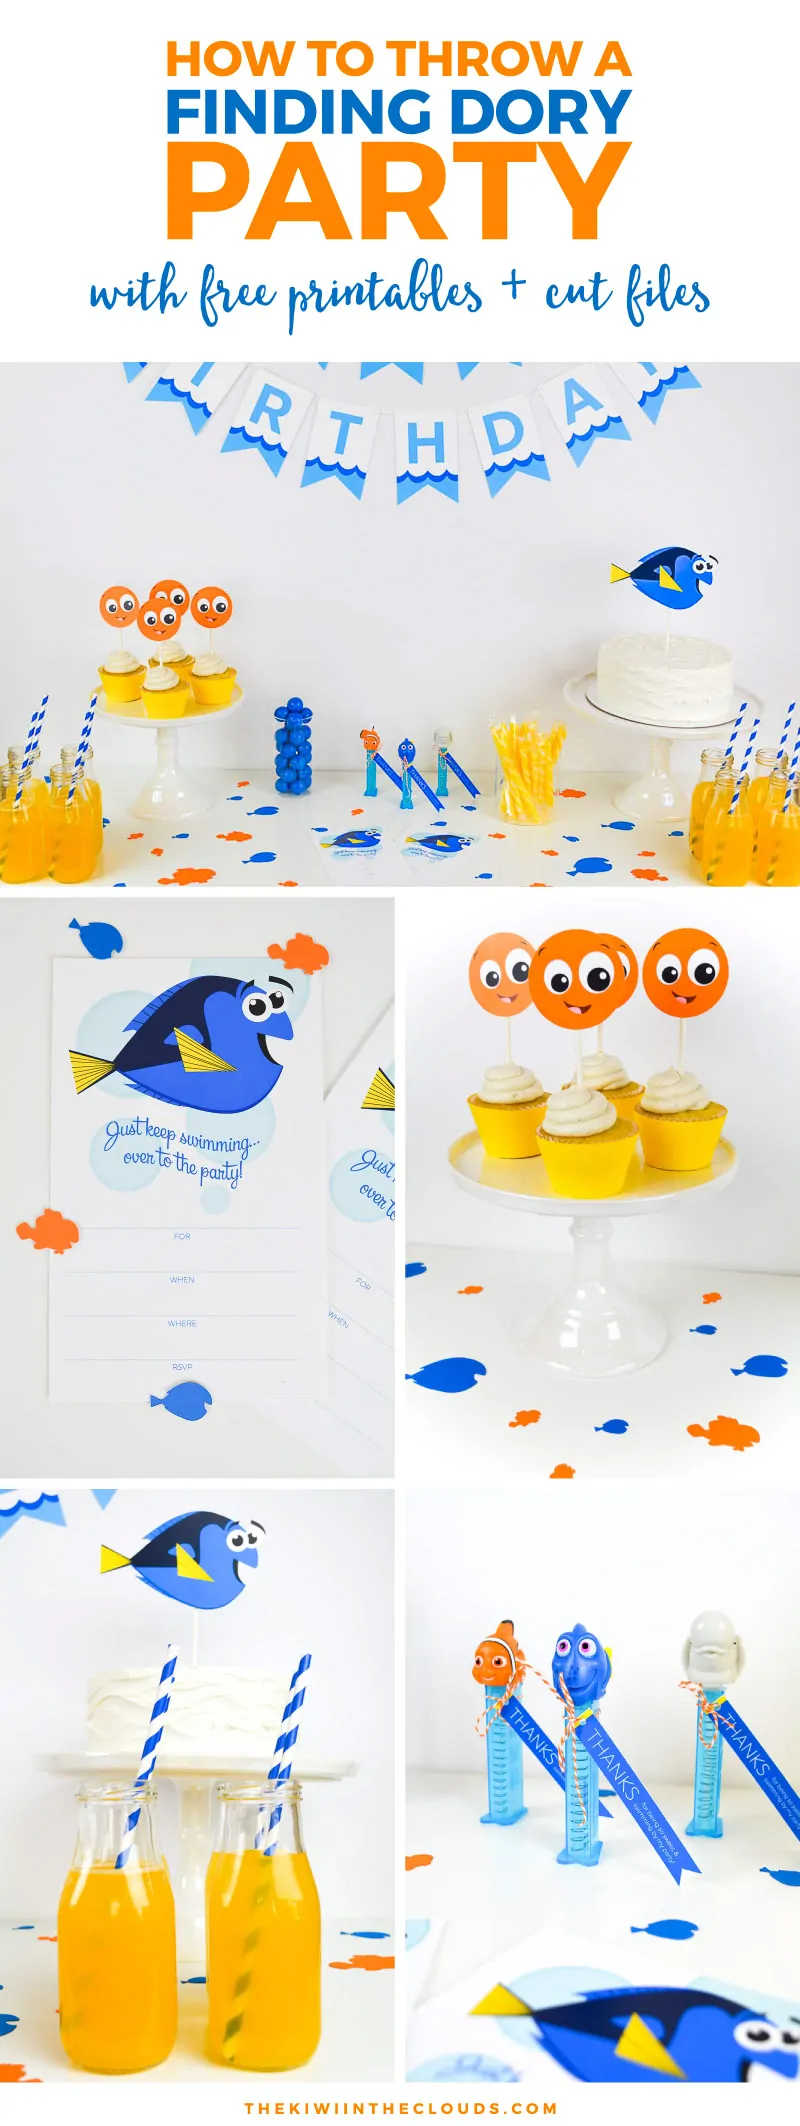 Join in on all the excitement of the Finding Nemo sequel with this Finding Dory birthday party guide that includes lots of fun & FREE printables! This party is sure to be a hit with your kids!